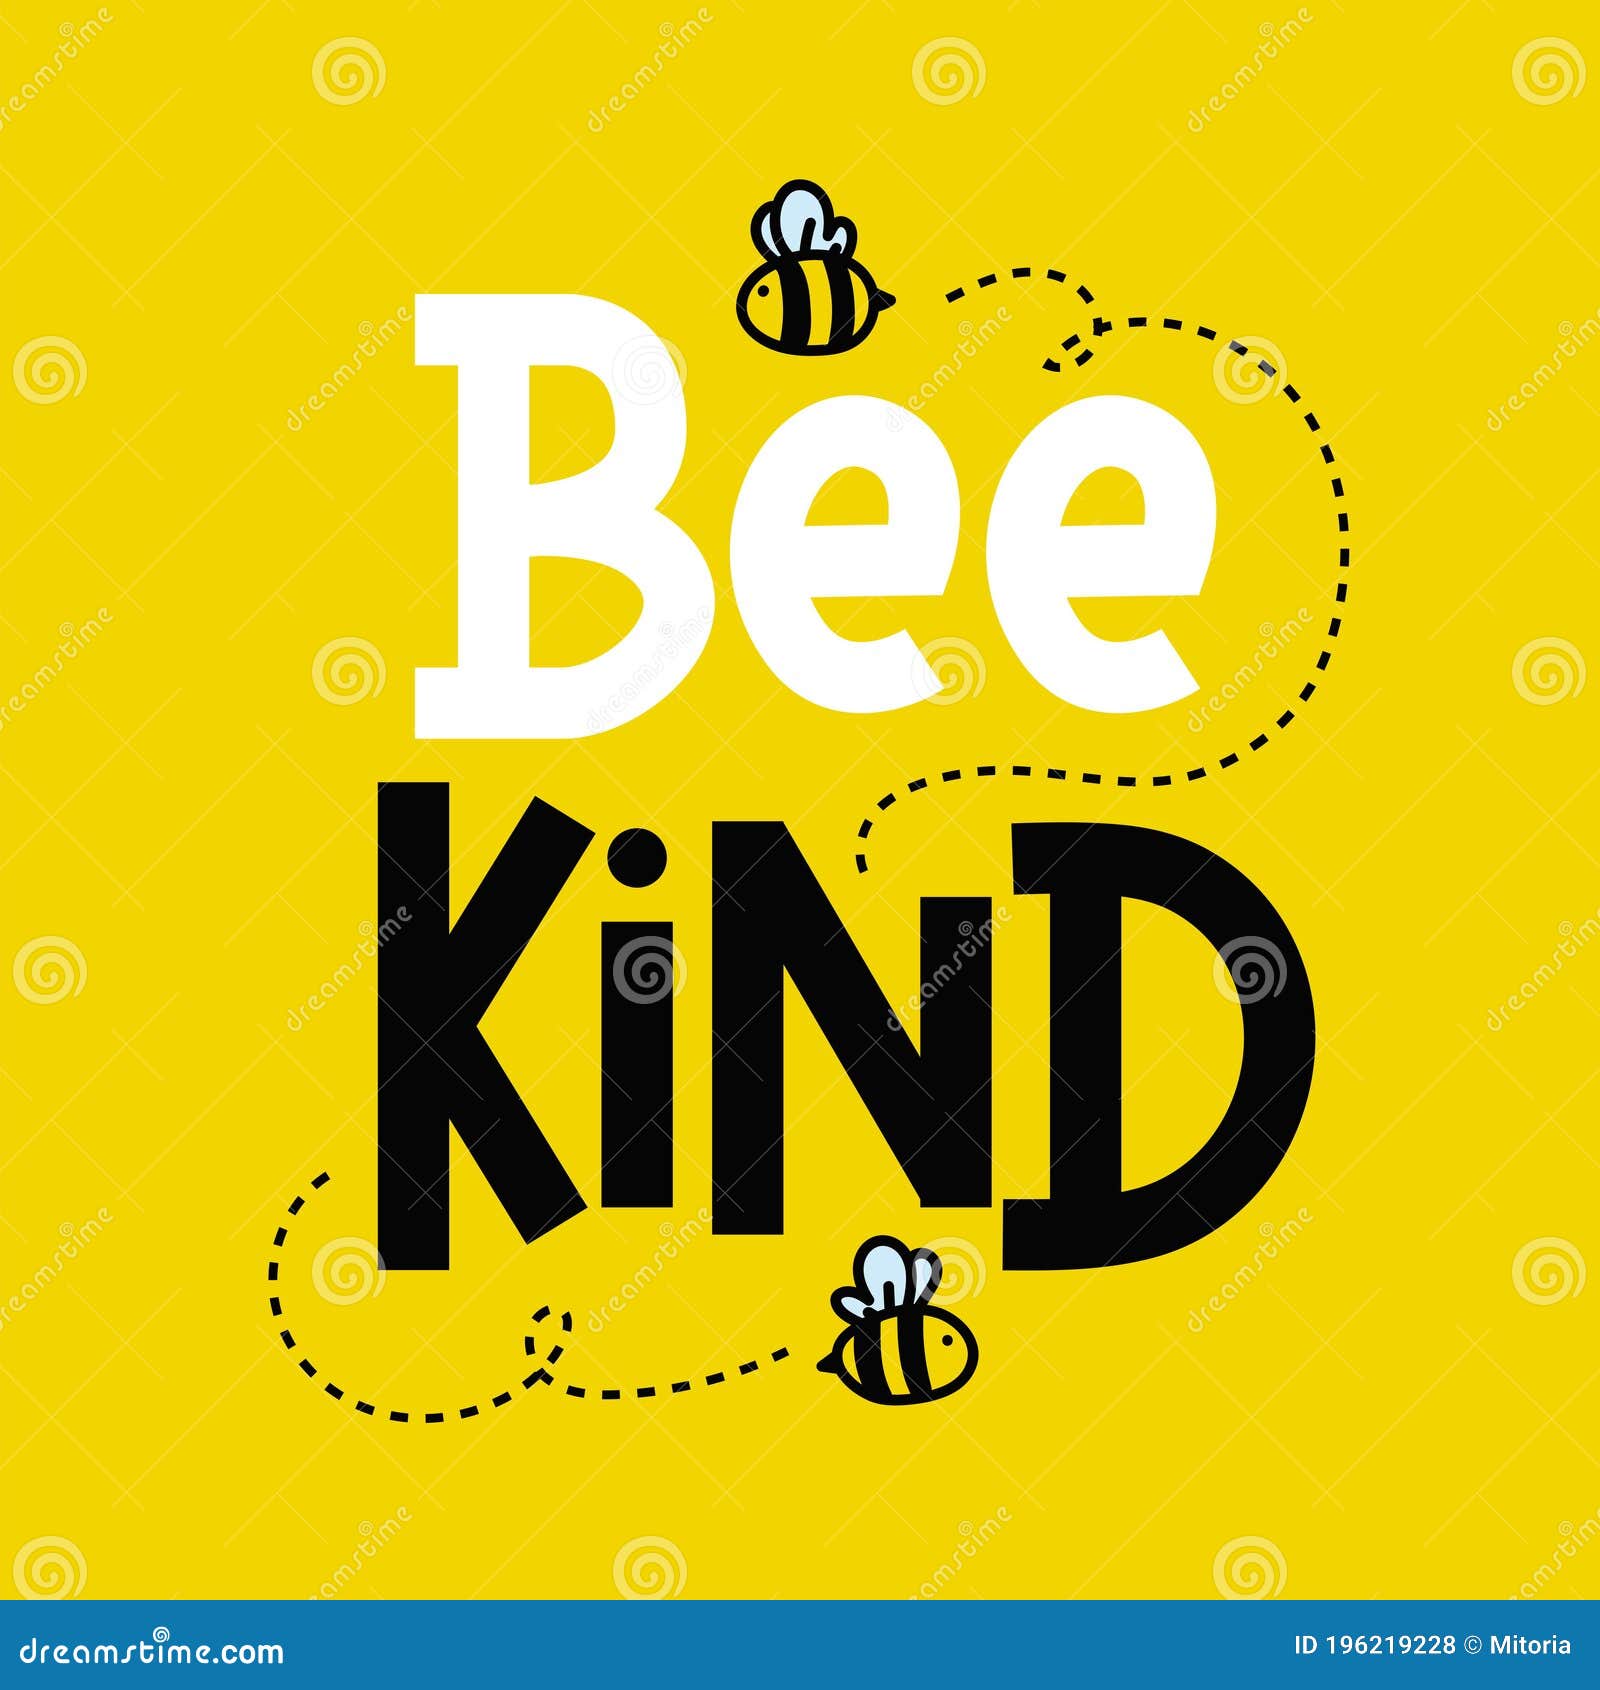 bee kind cute inspirational card with flying bees and lettering  on colorful yellow background